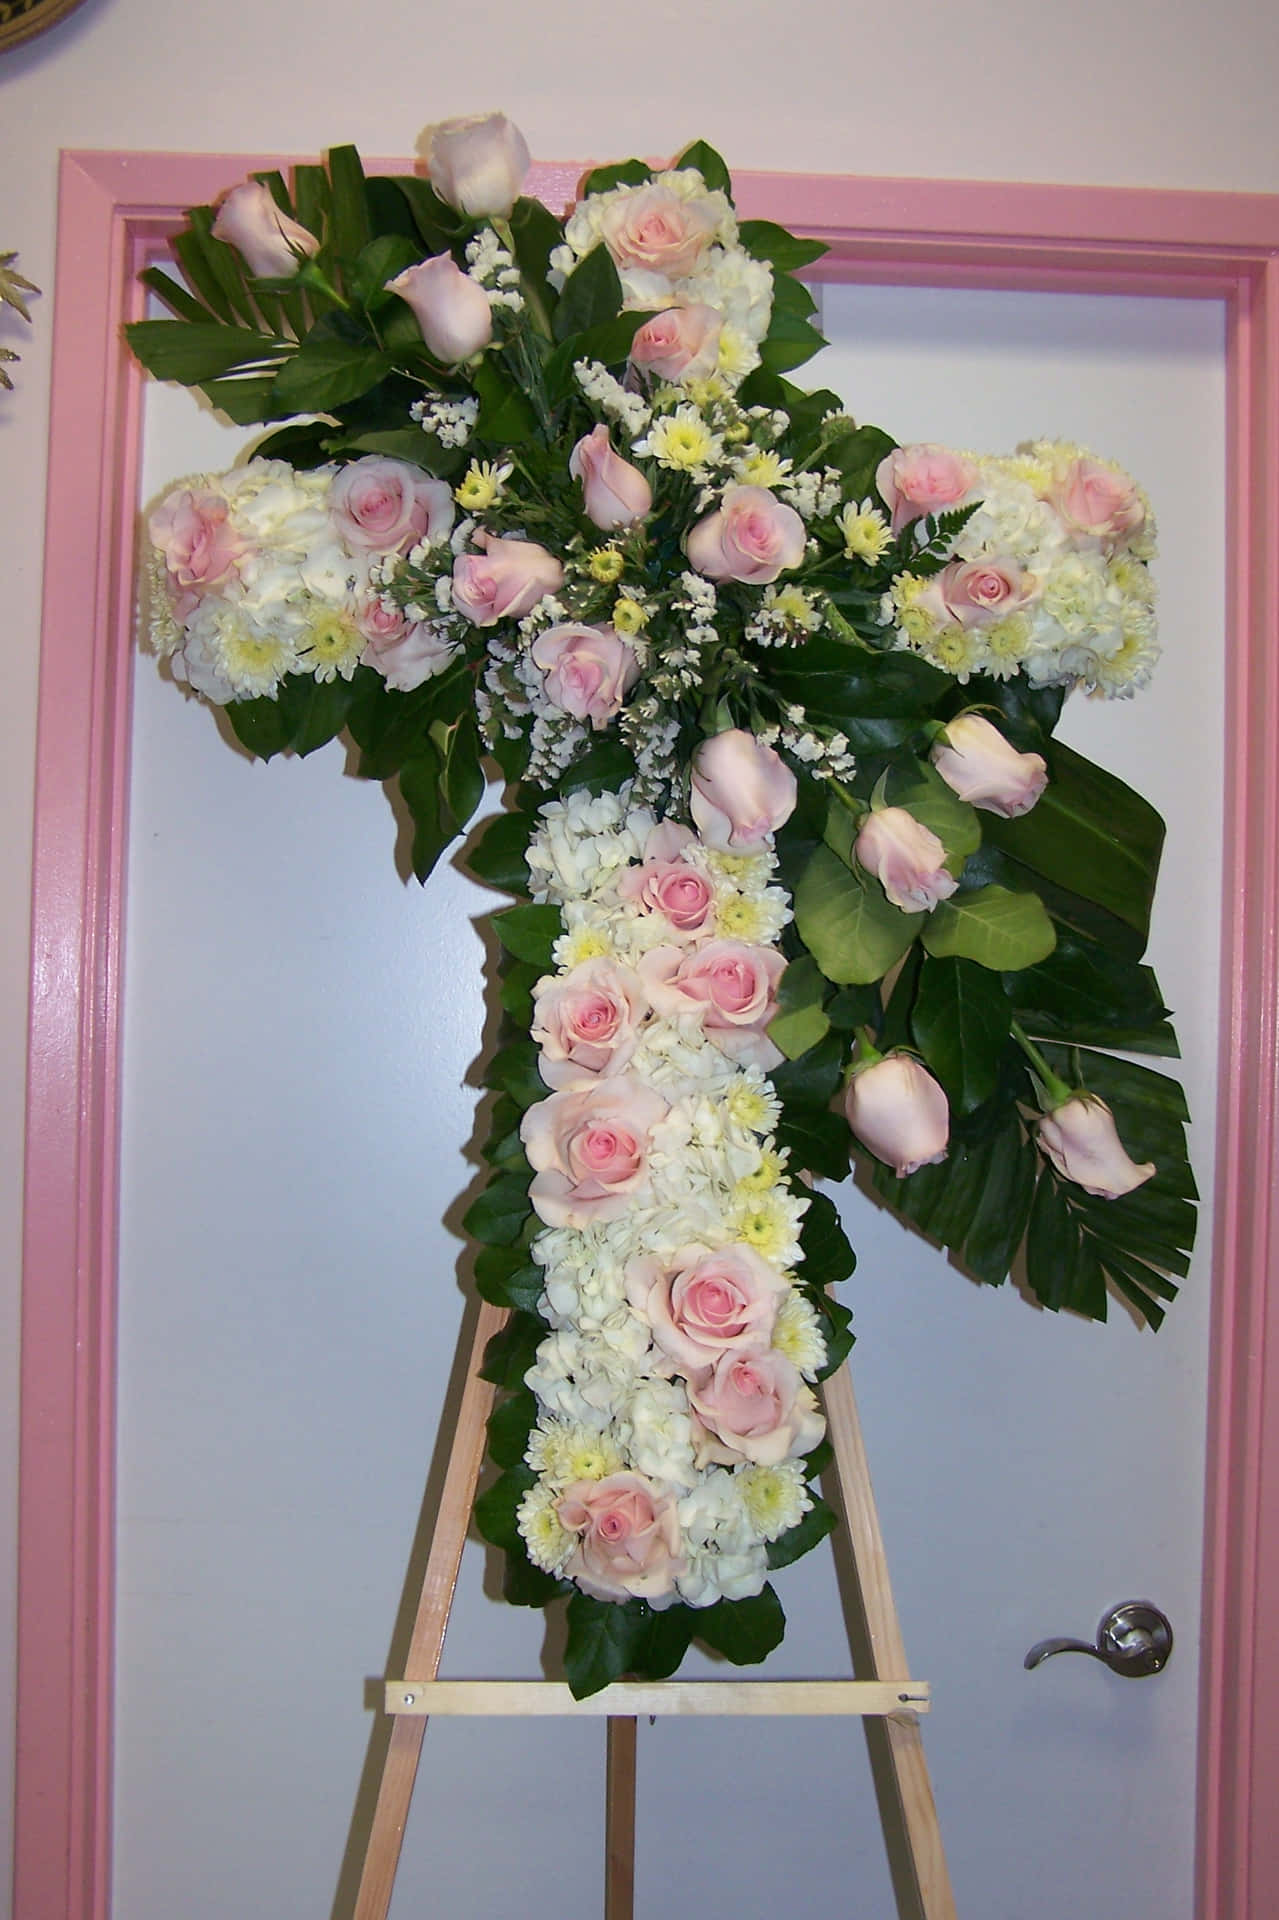 A Pink And White Cross With Flowers On A Pink Stand